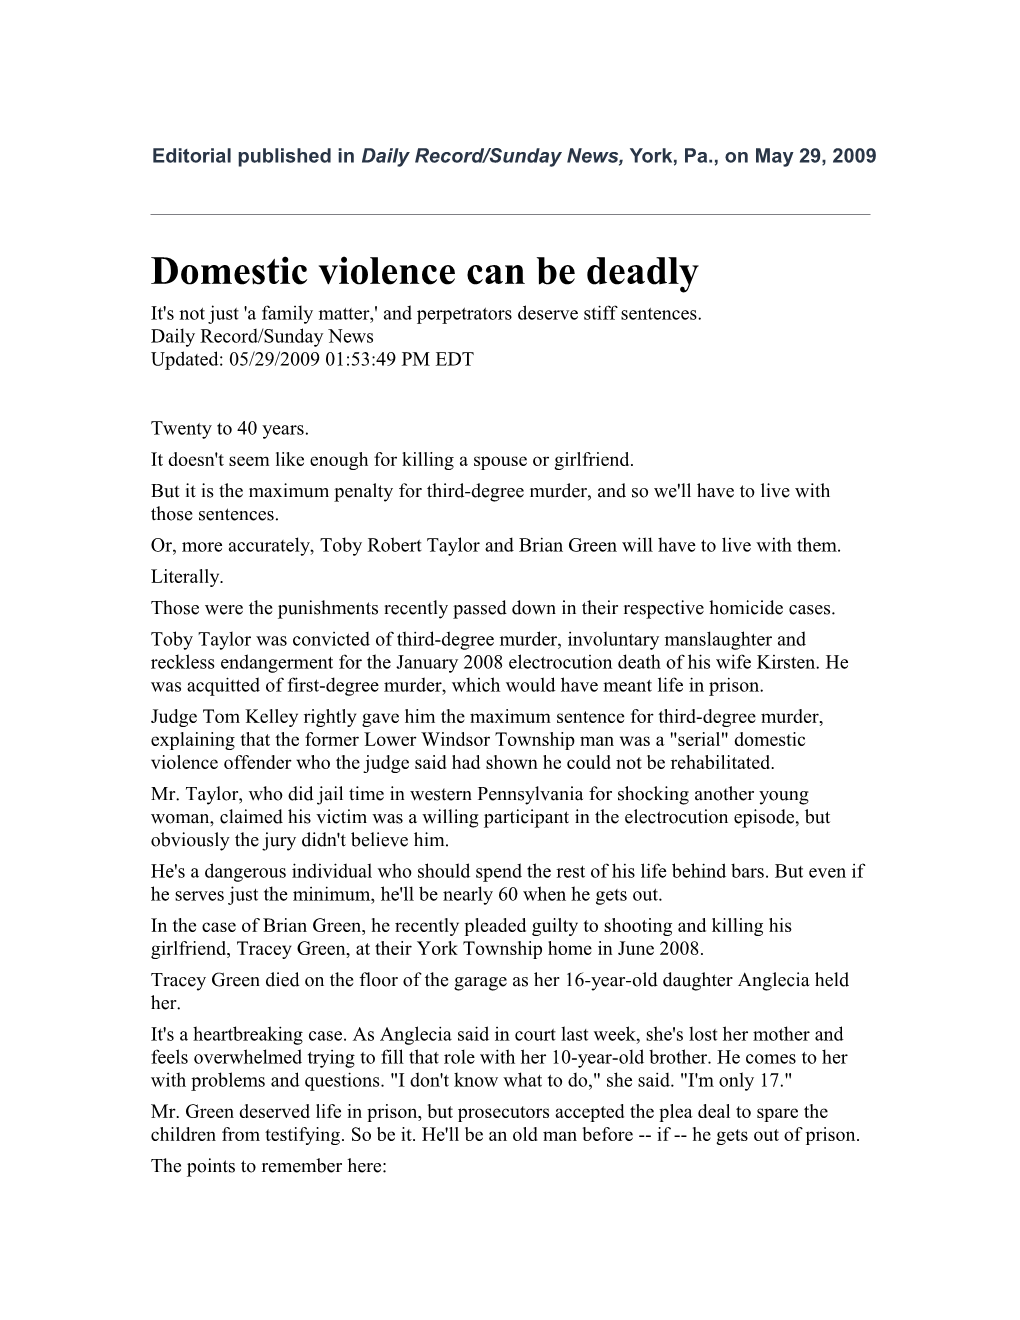 Domestic Violence Can Be Deadly